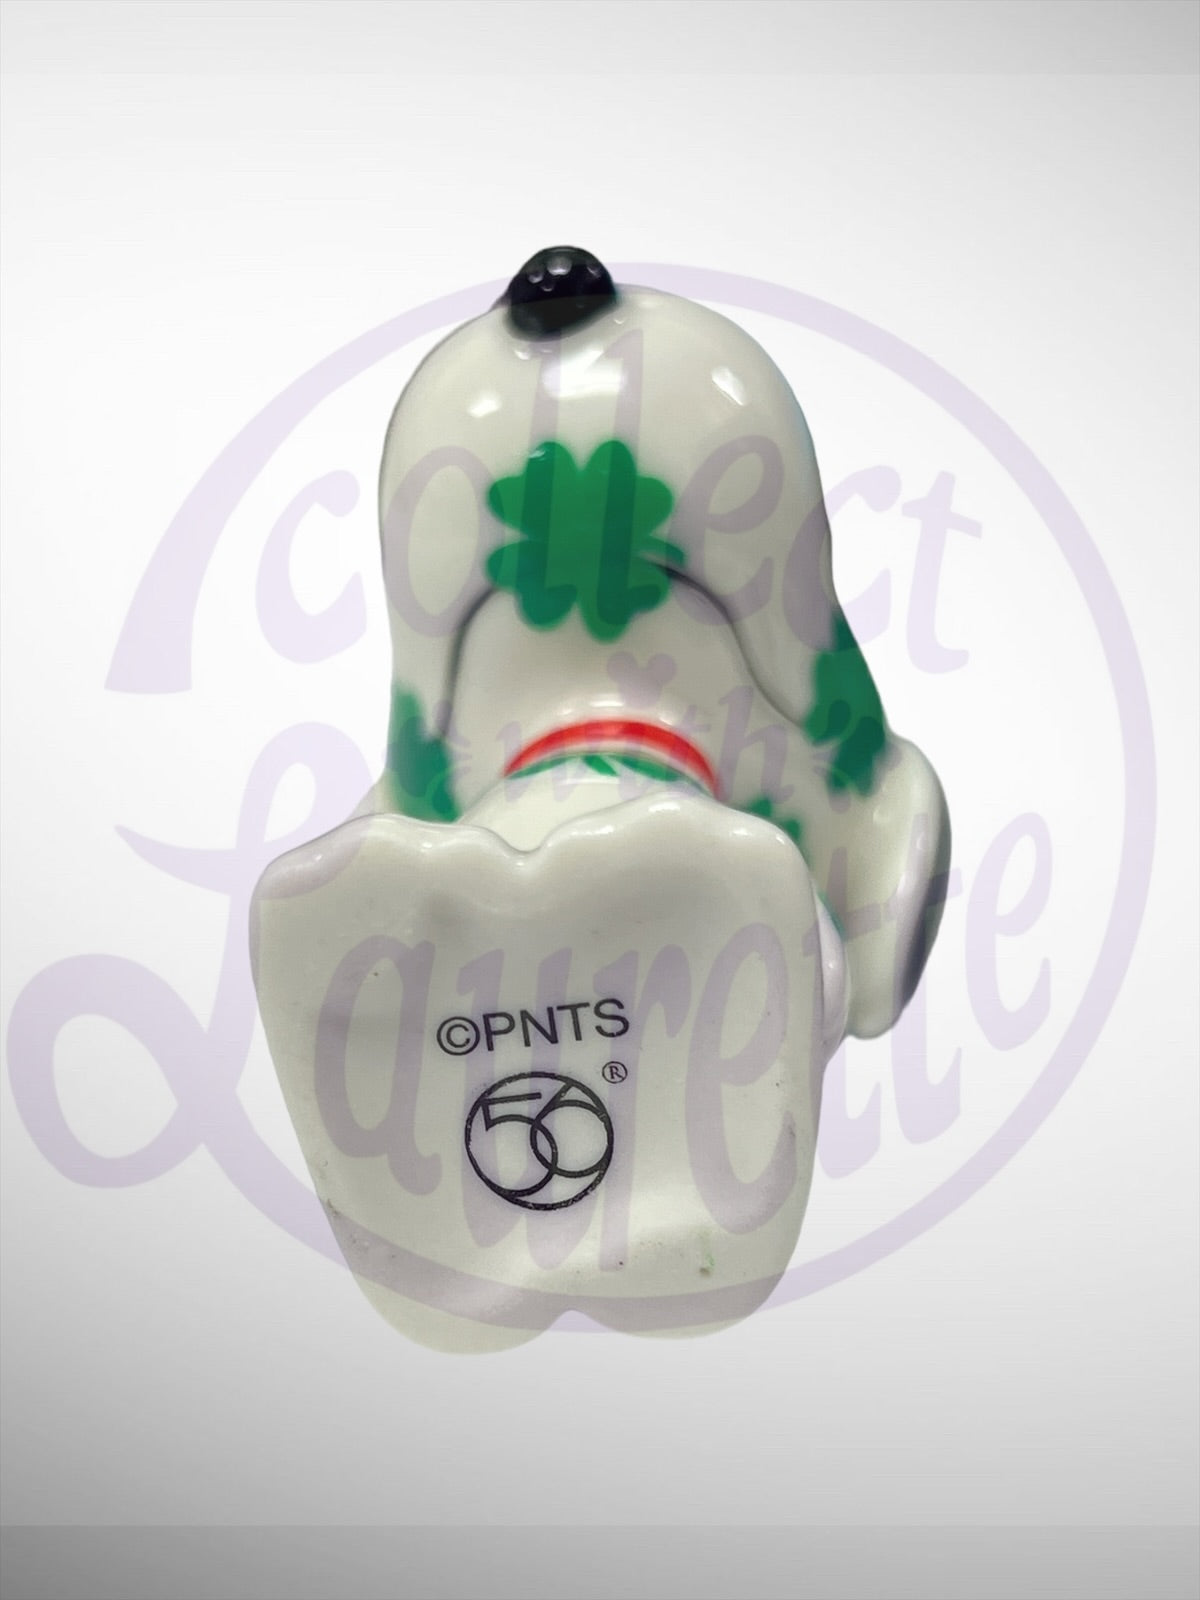 Department 56 Snoopy by Design D56 - Lucky Dog Shamrock Peanuts Figurine (No Box)